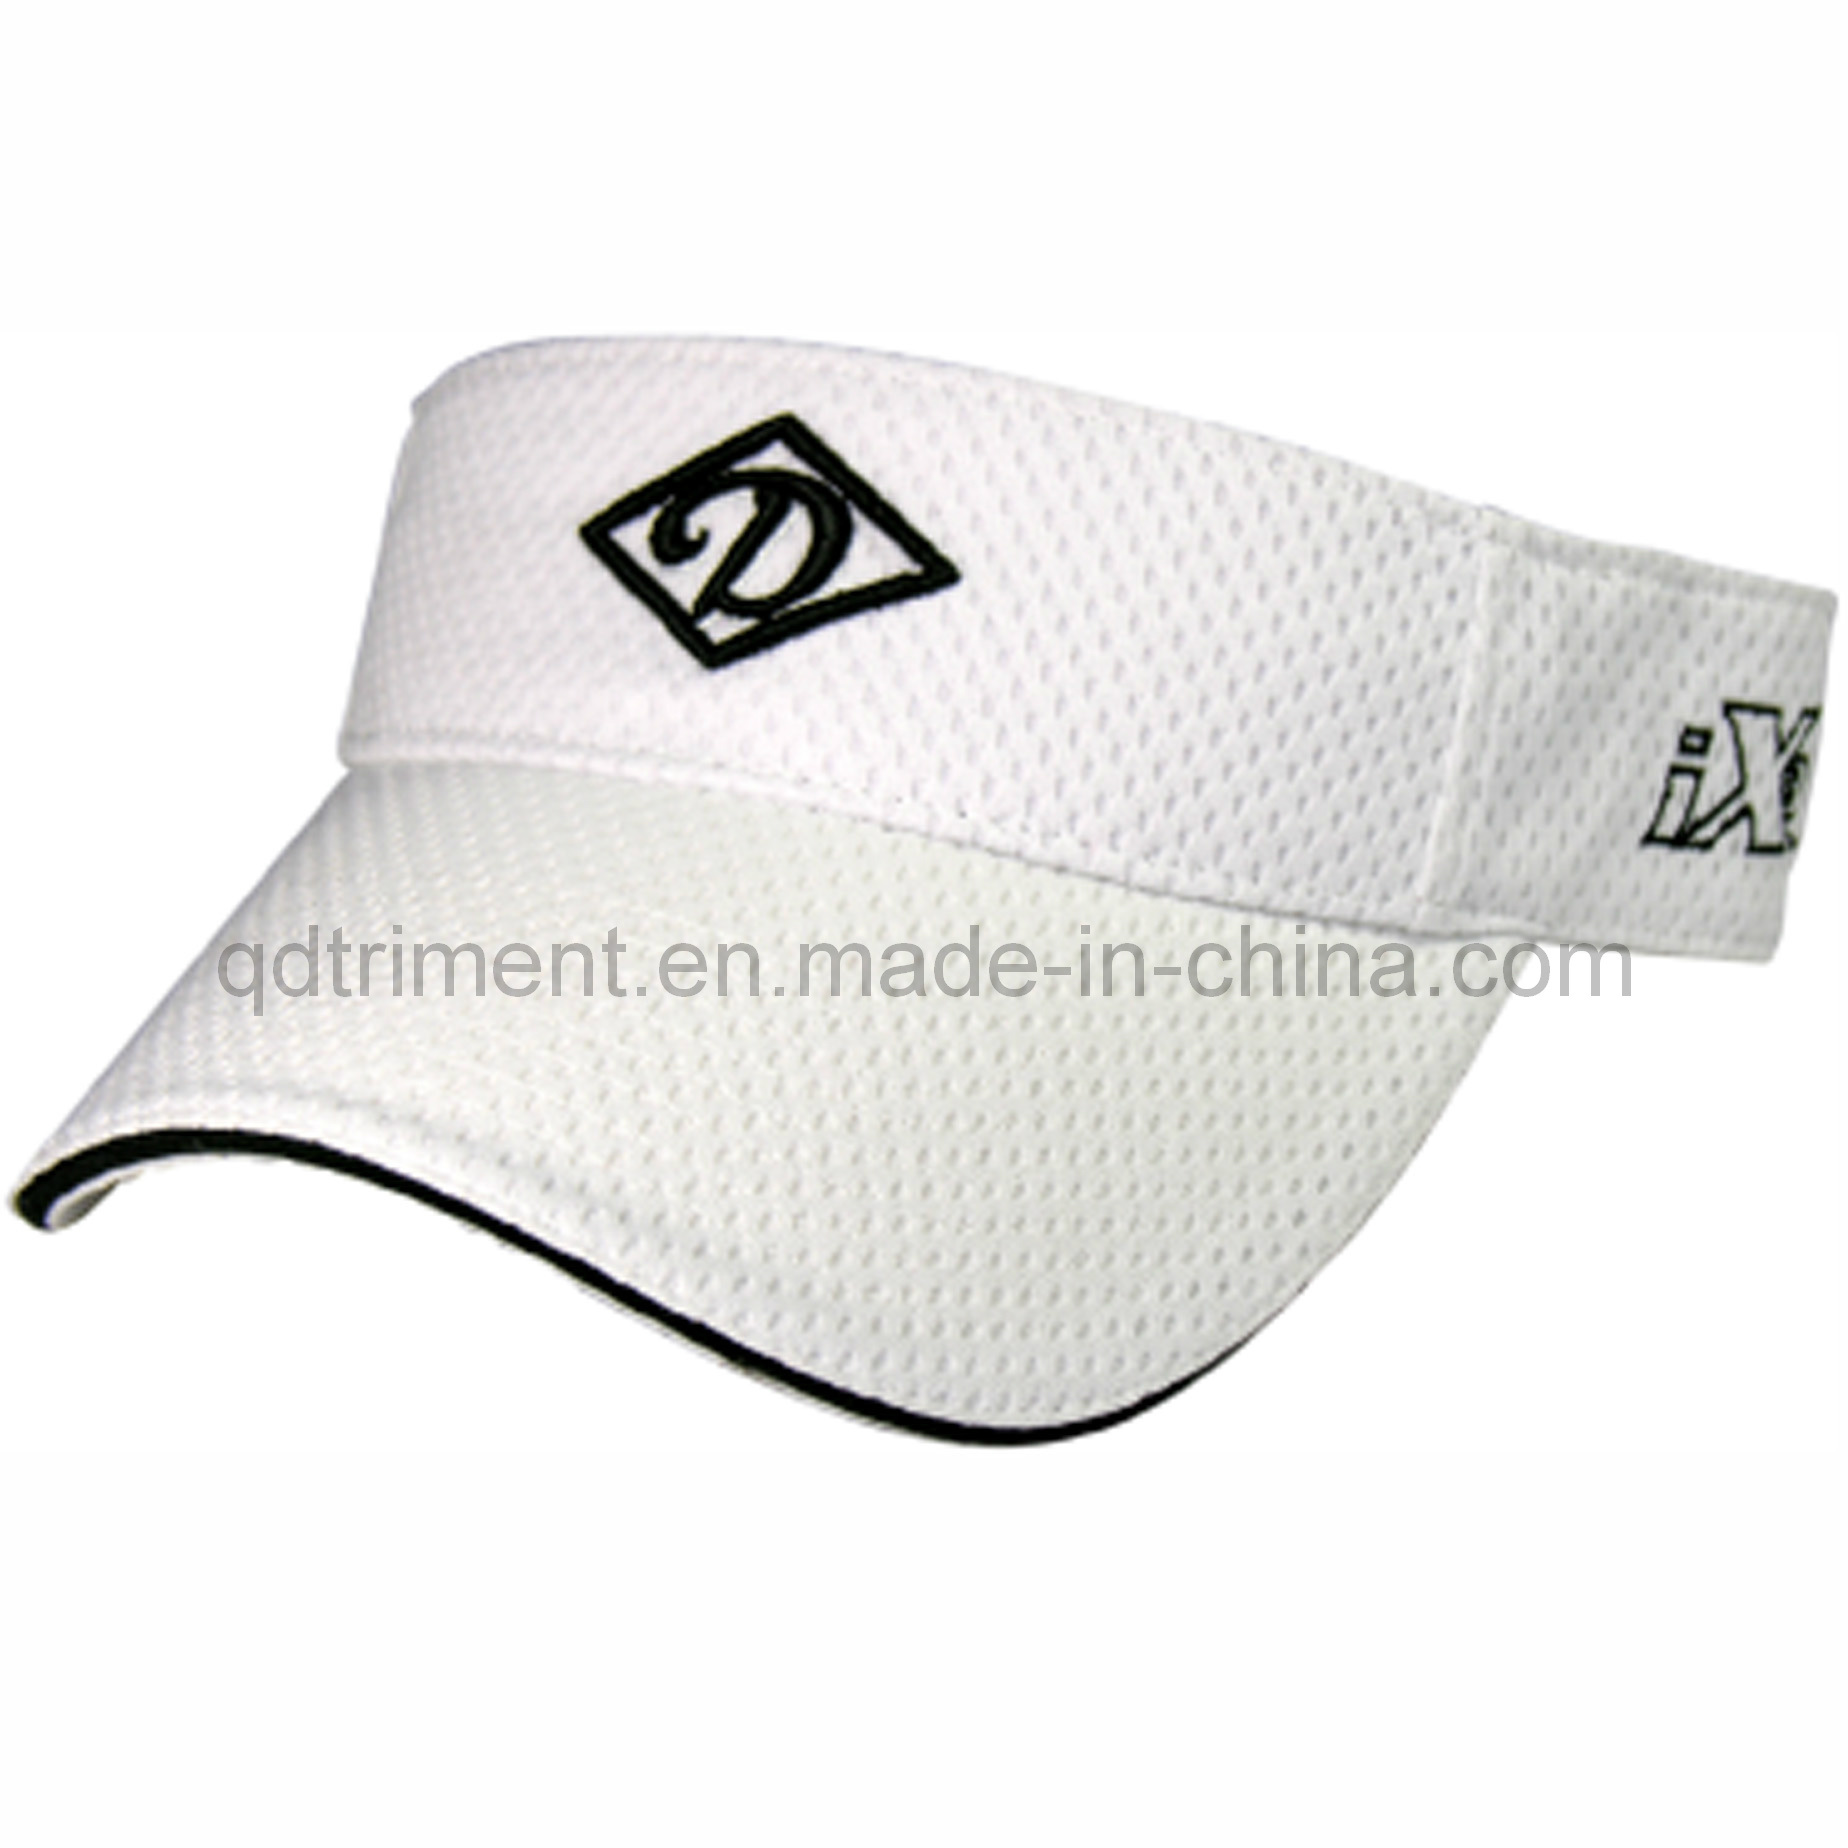 Top Quality Polyester Breathable Mesh Embroidery Sport Visor (TRV004)